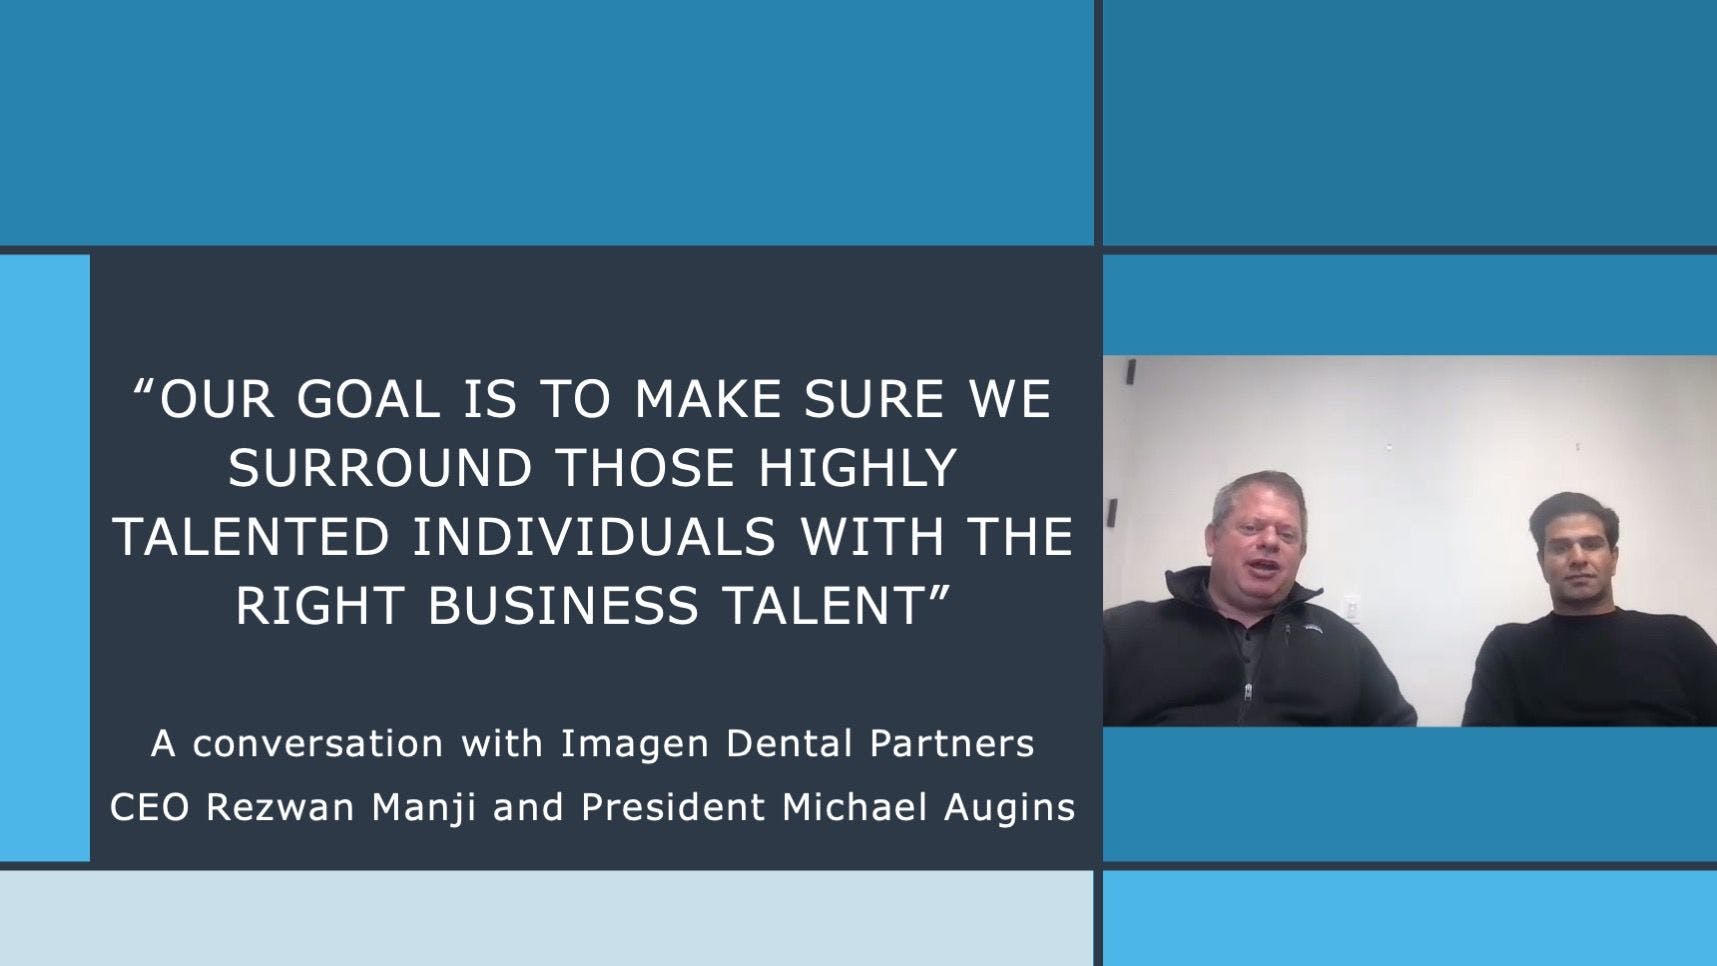 "Our Goal is to Make Sure We Surround Those Highly Talented Individuals With the Right Business Talent" — A conversation with Imagen Dental Partners CEO Rezwan Manji and President Michael Augins